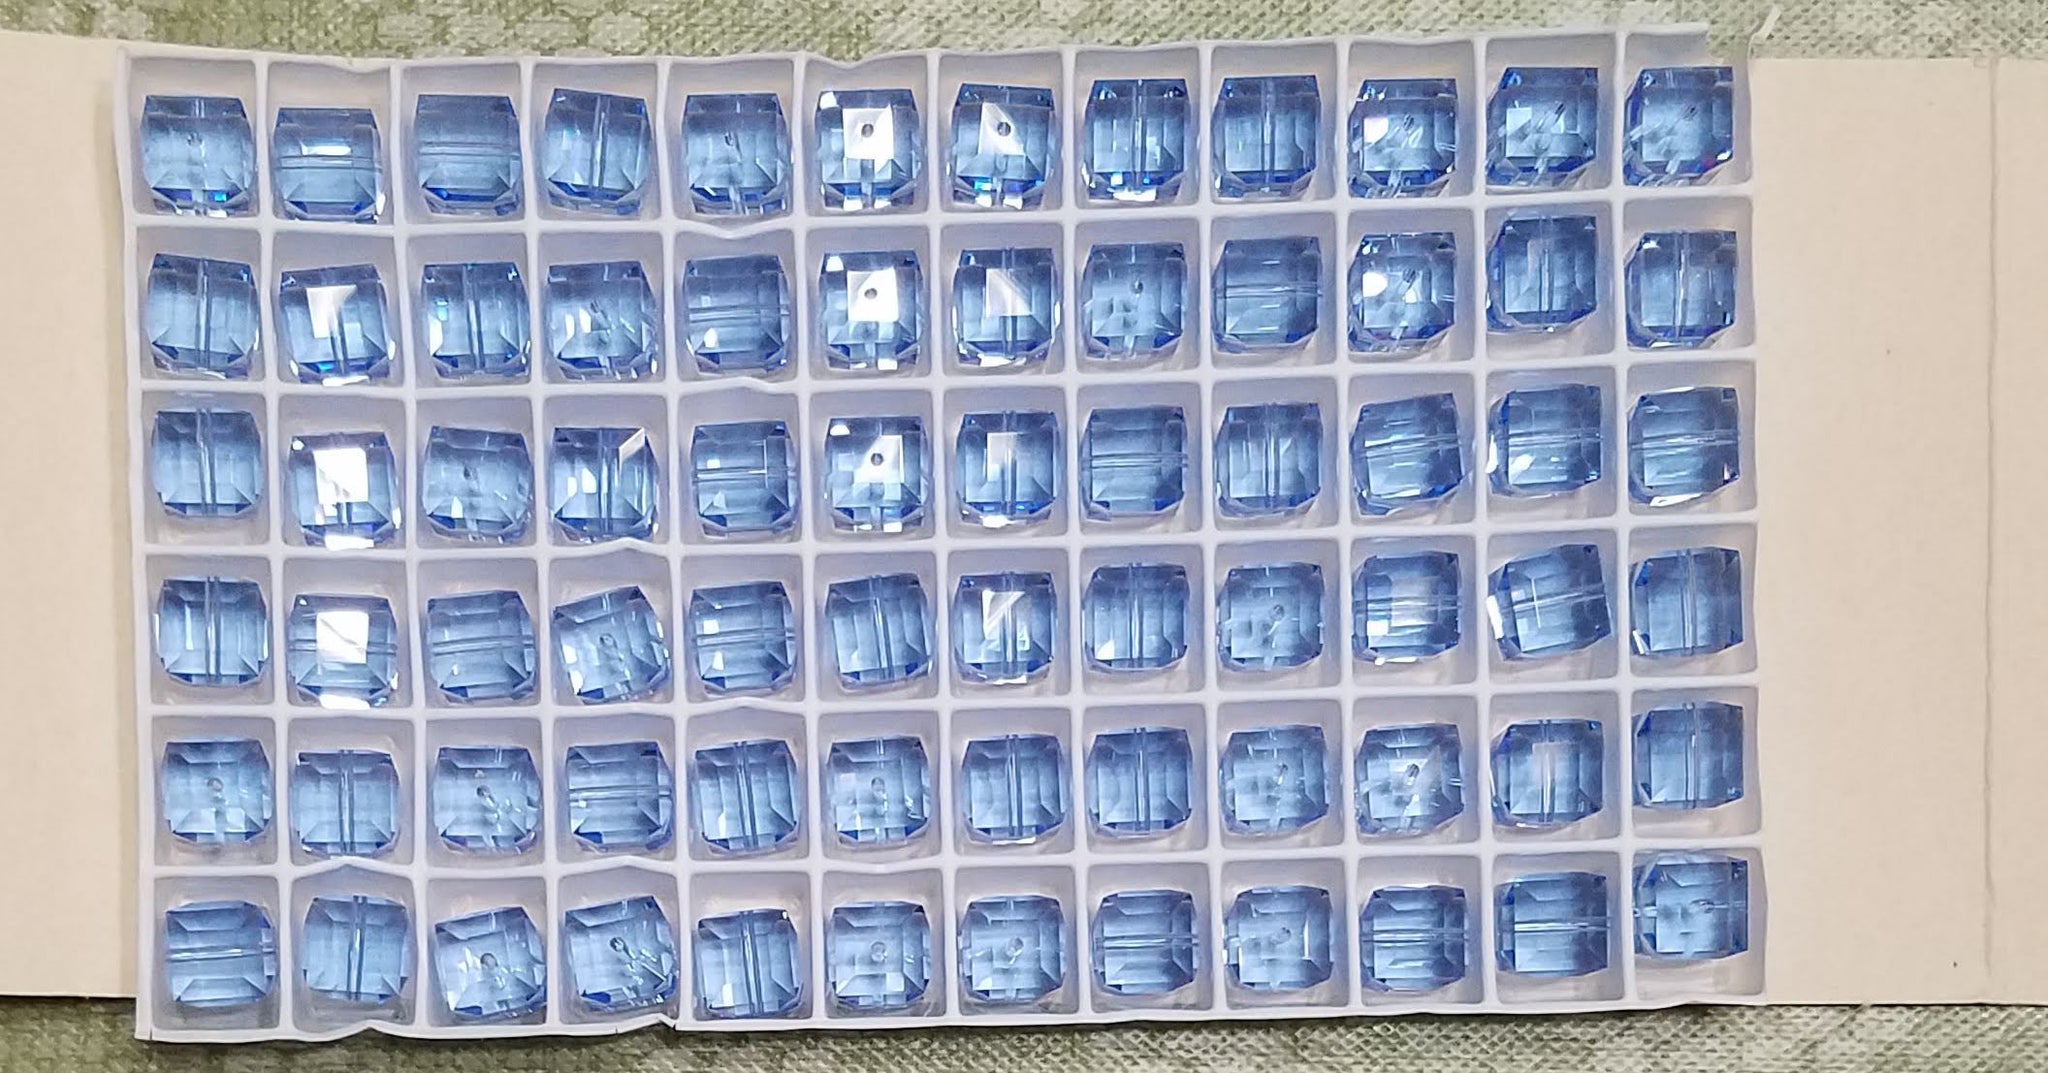 AUTHENTIC Swarovski Crystal  #5601 8mm Cube Beads 72 pieces Light Sapphire